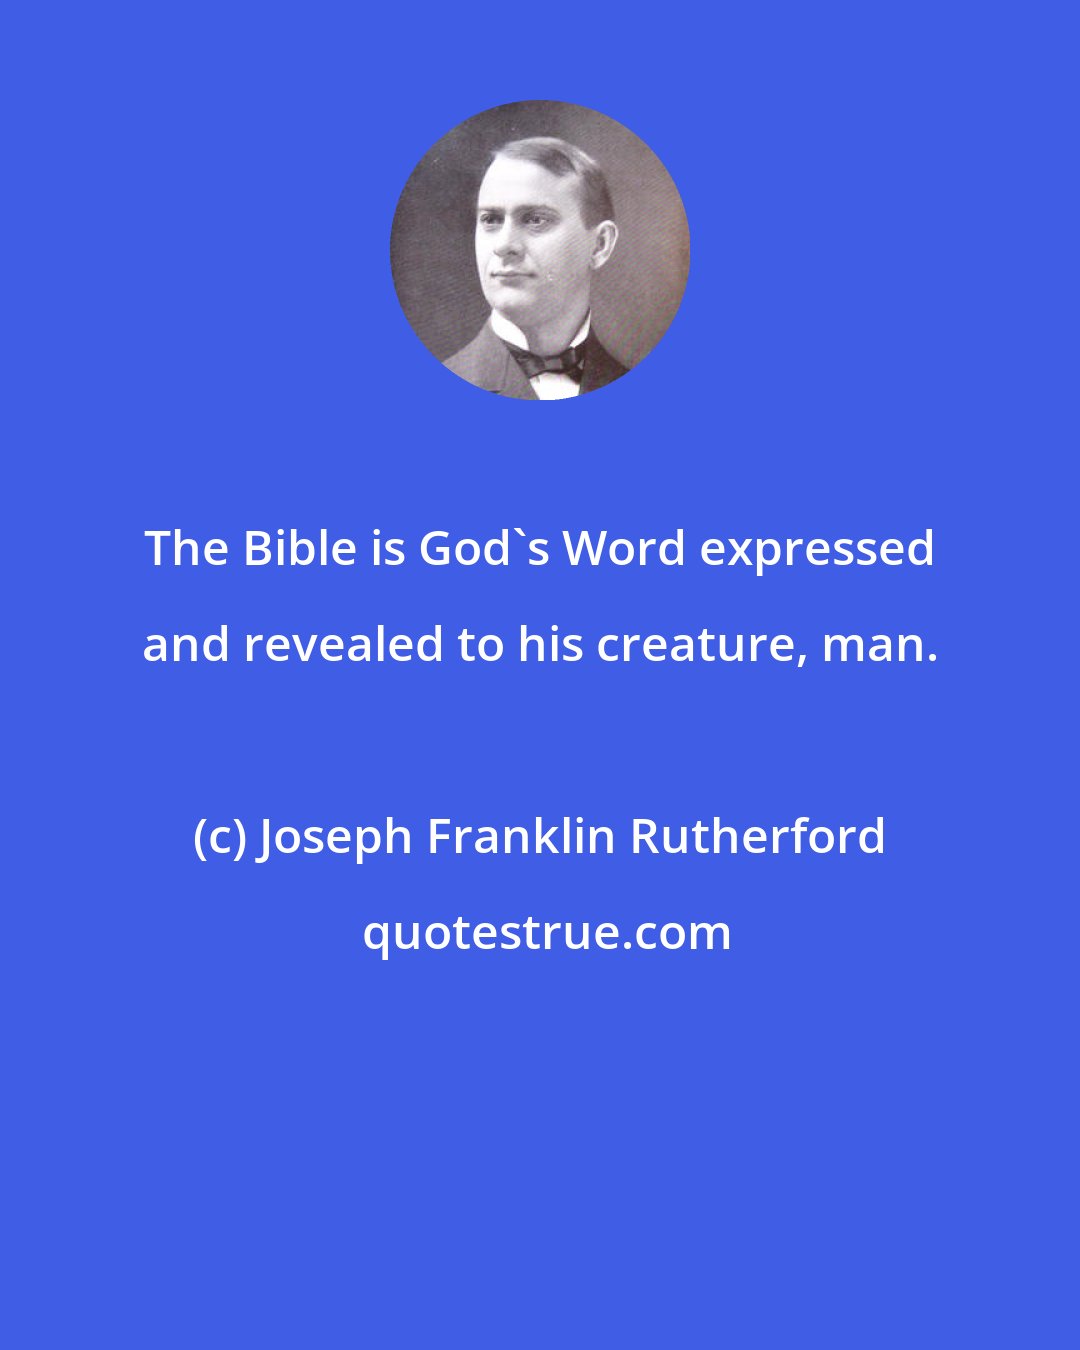 Joseph Franklin Rutherford: The Bible is God's Word expressed and revealed to his creature, man.